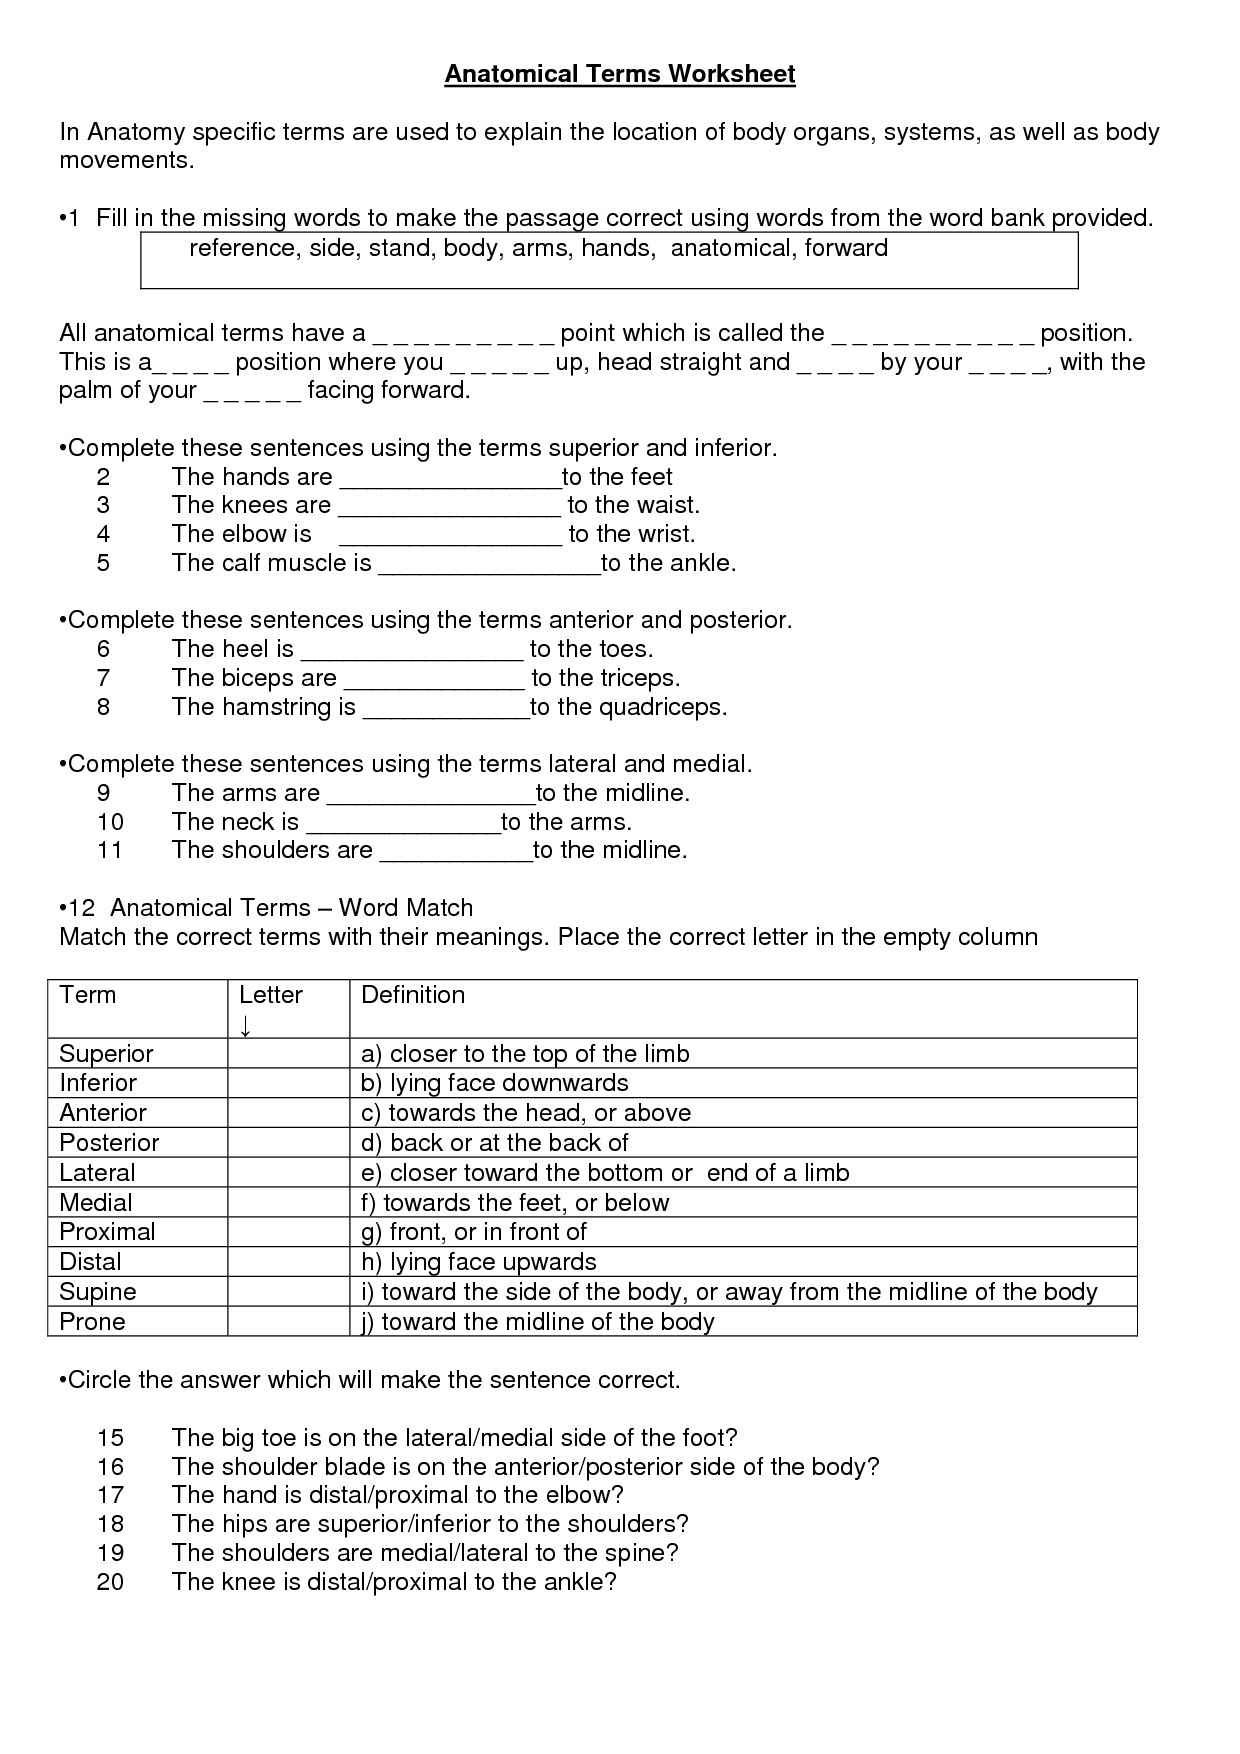 10 Best Images of Worksheets Position And Location - Above ...